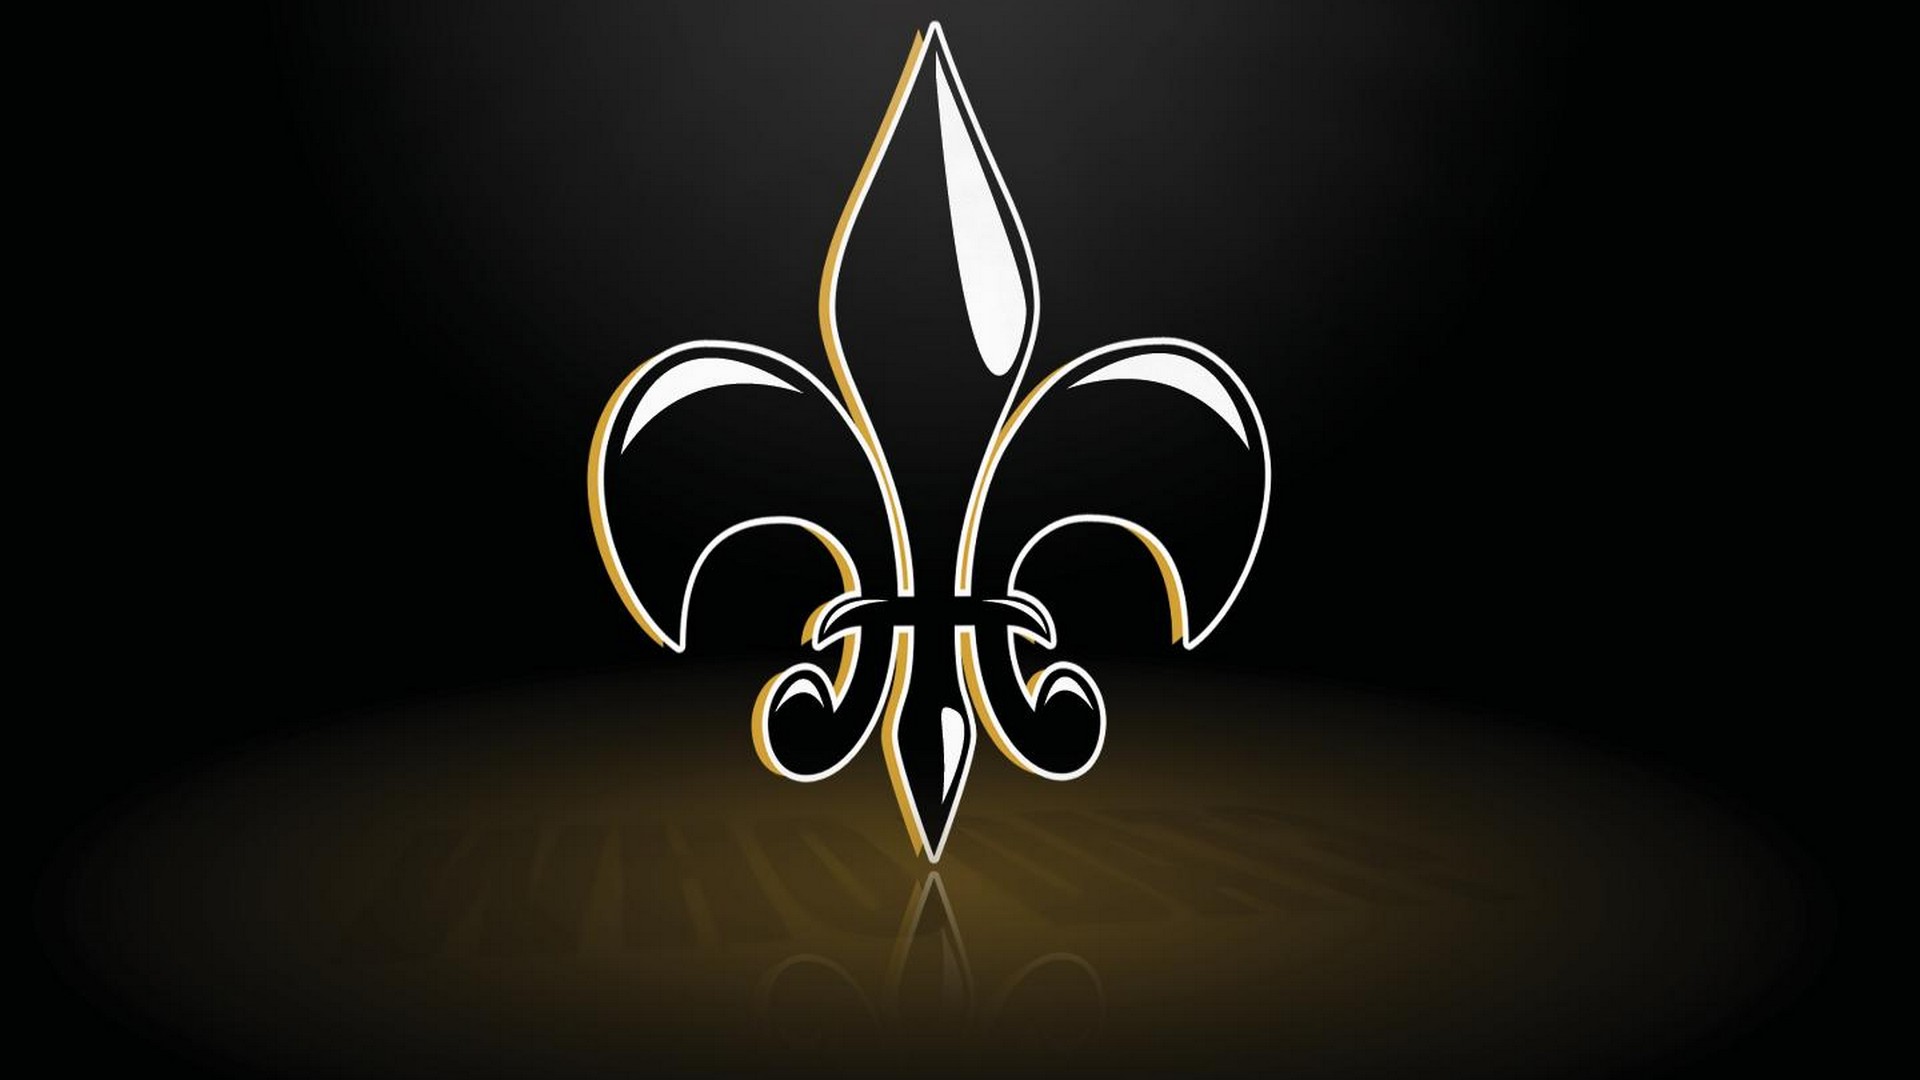 New Orleans Saints NFL Wallpaper With Resolution 1920X1080 pixel. You can make this wallpaper for your Mac or Windows Desktop Background, iPhone, Android or Tablet and another Smartphone device for free